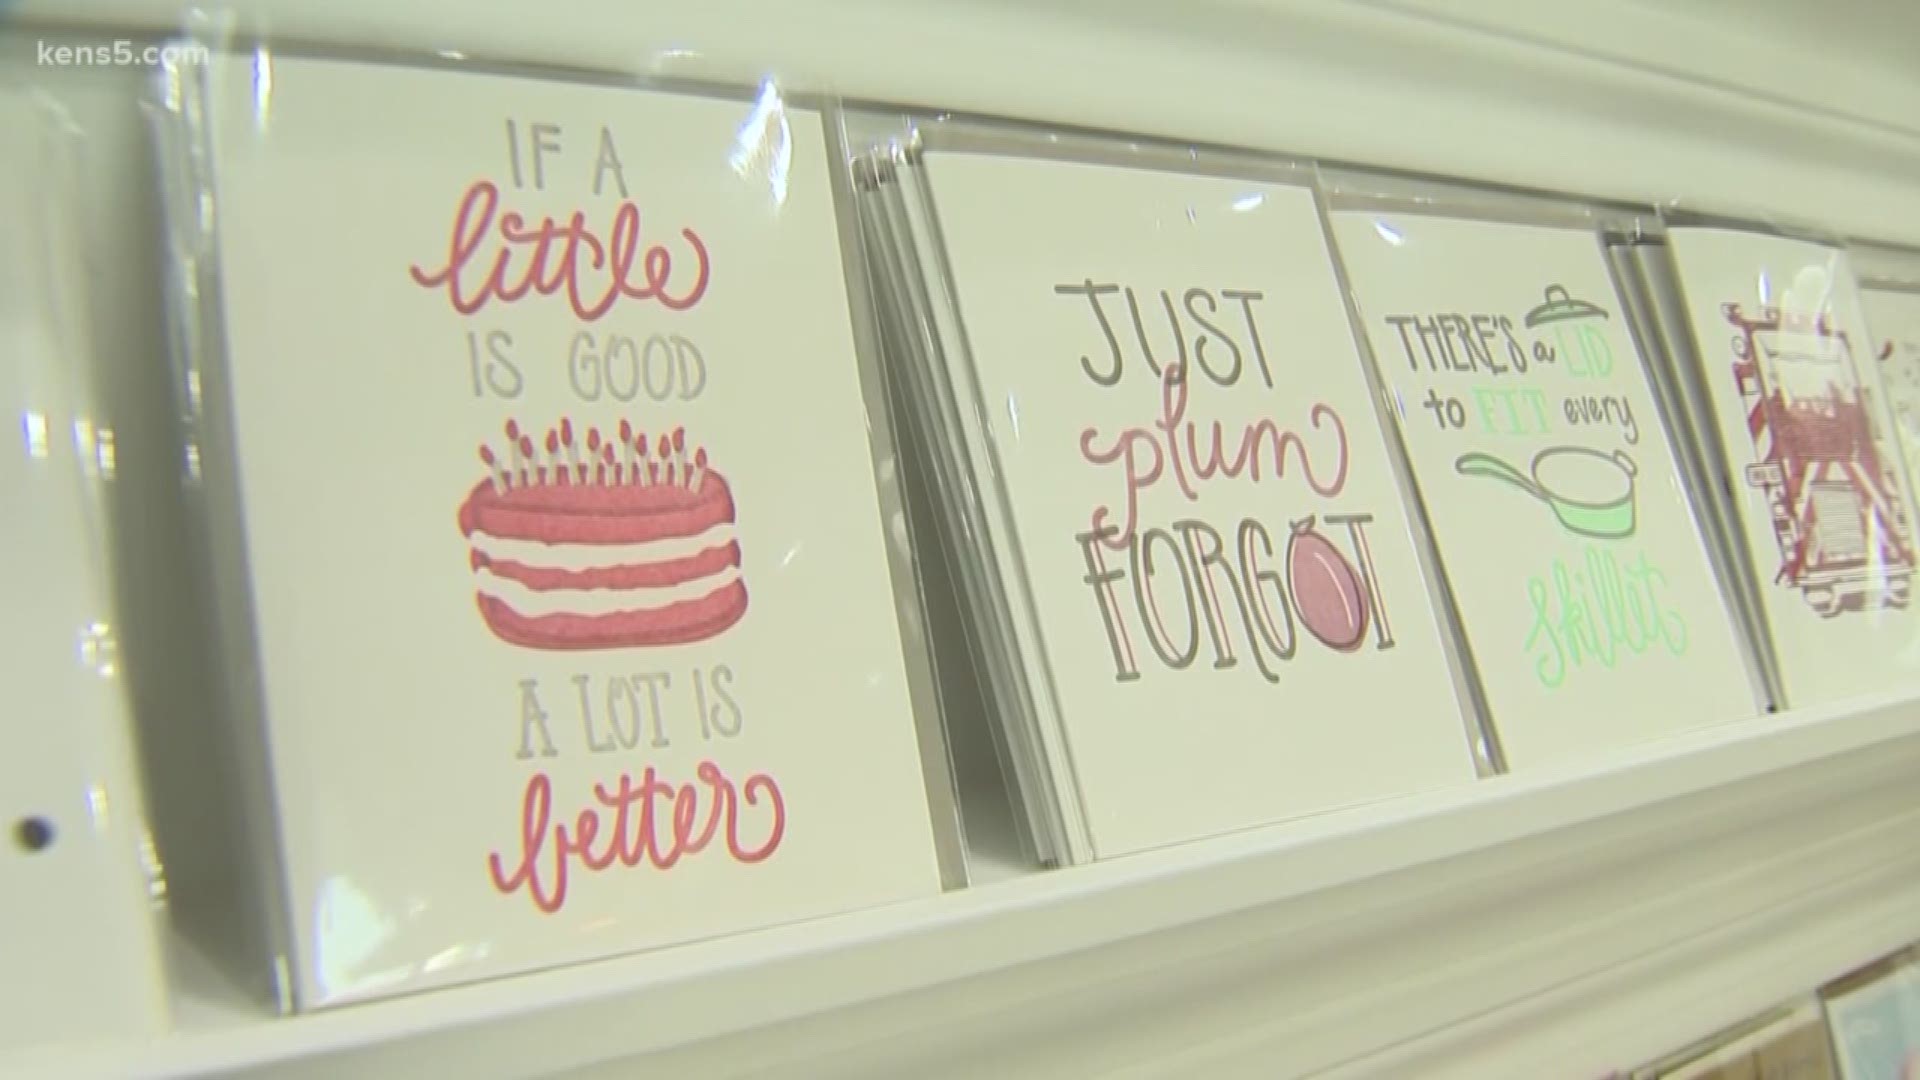 In this week's Made in SA, we meet a local husband and wife duo using everyday sayings to make their cards stand out.